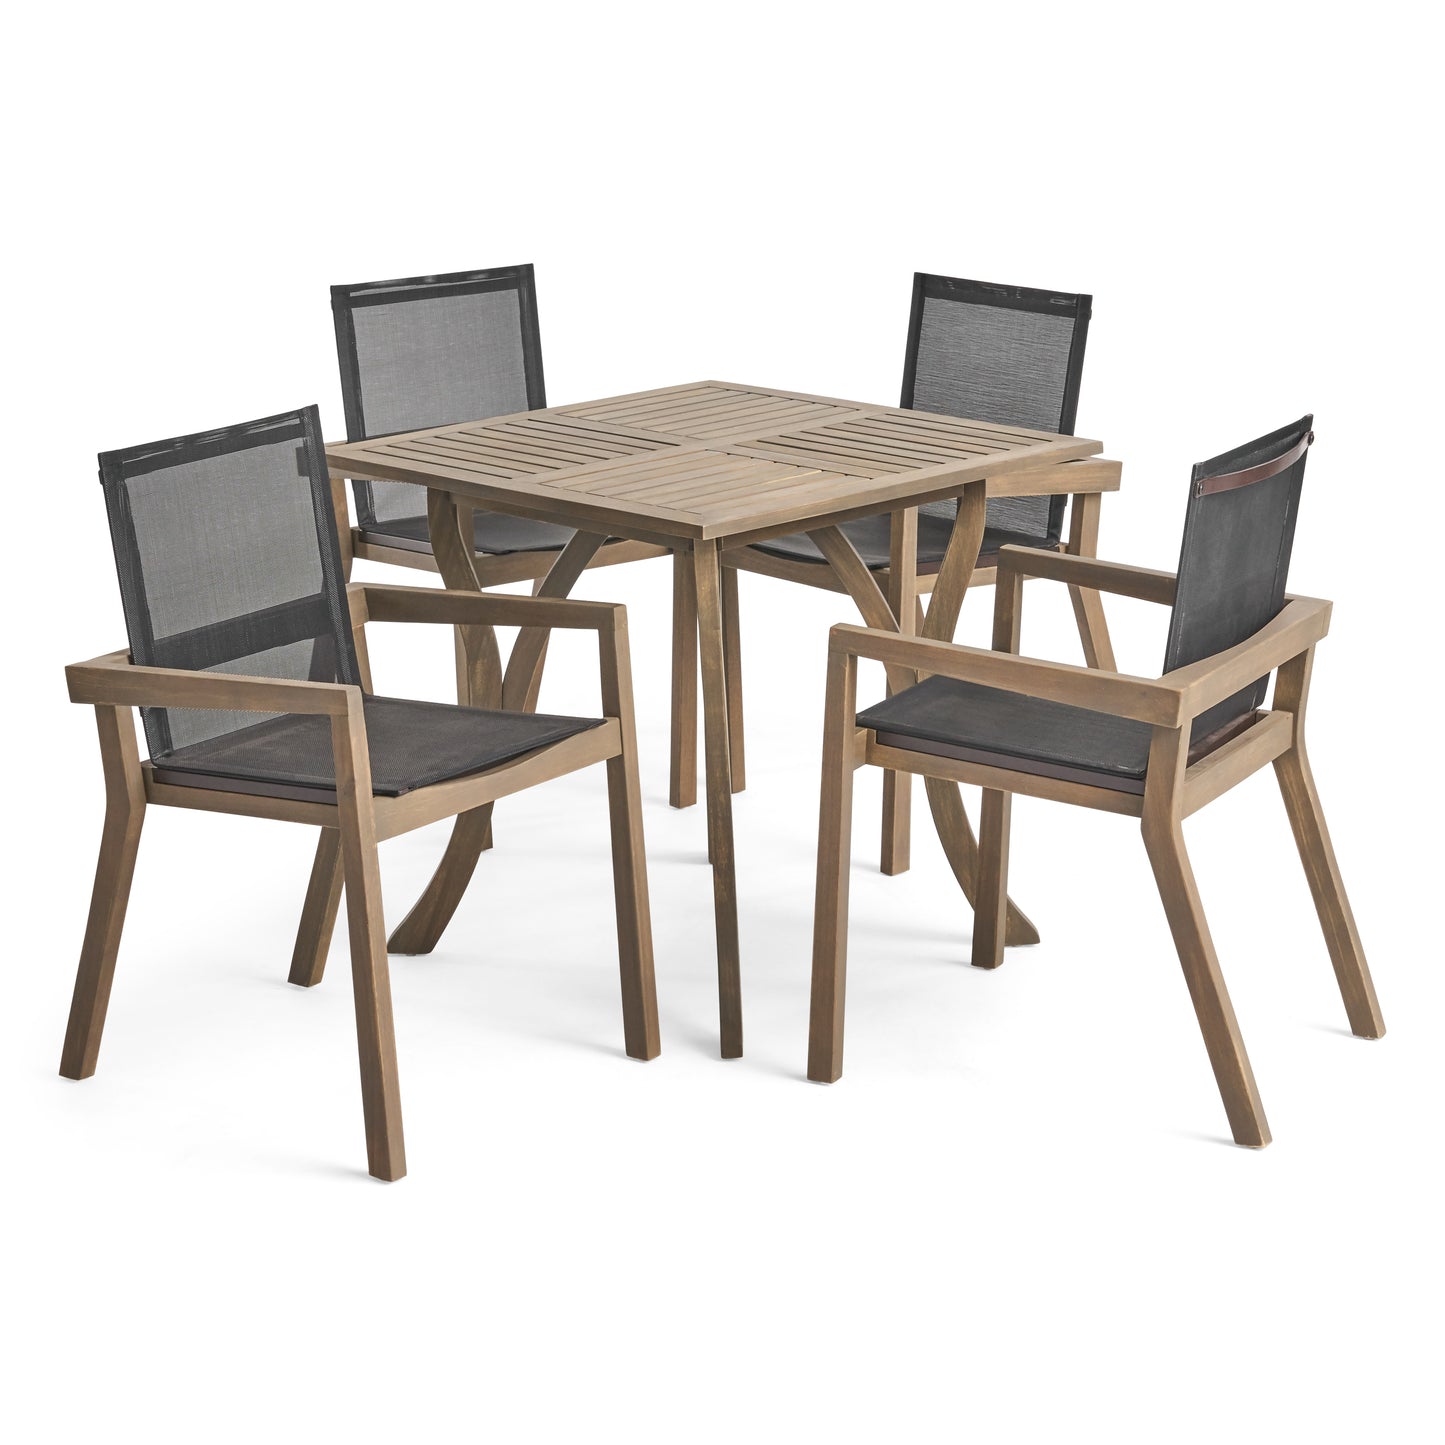 Ruiz Outdoor Acacia Wood 4 Seater Square Dining Set with Mesh Seats